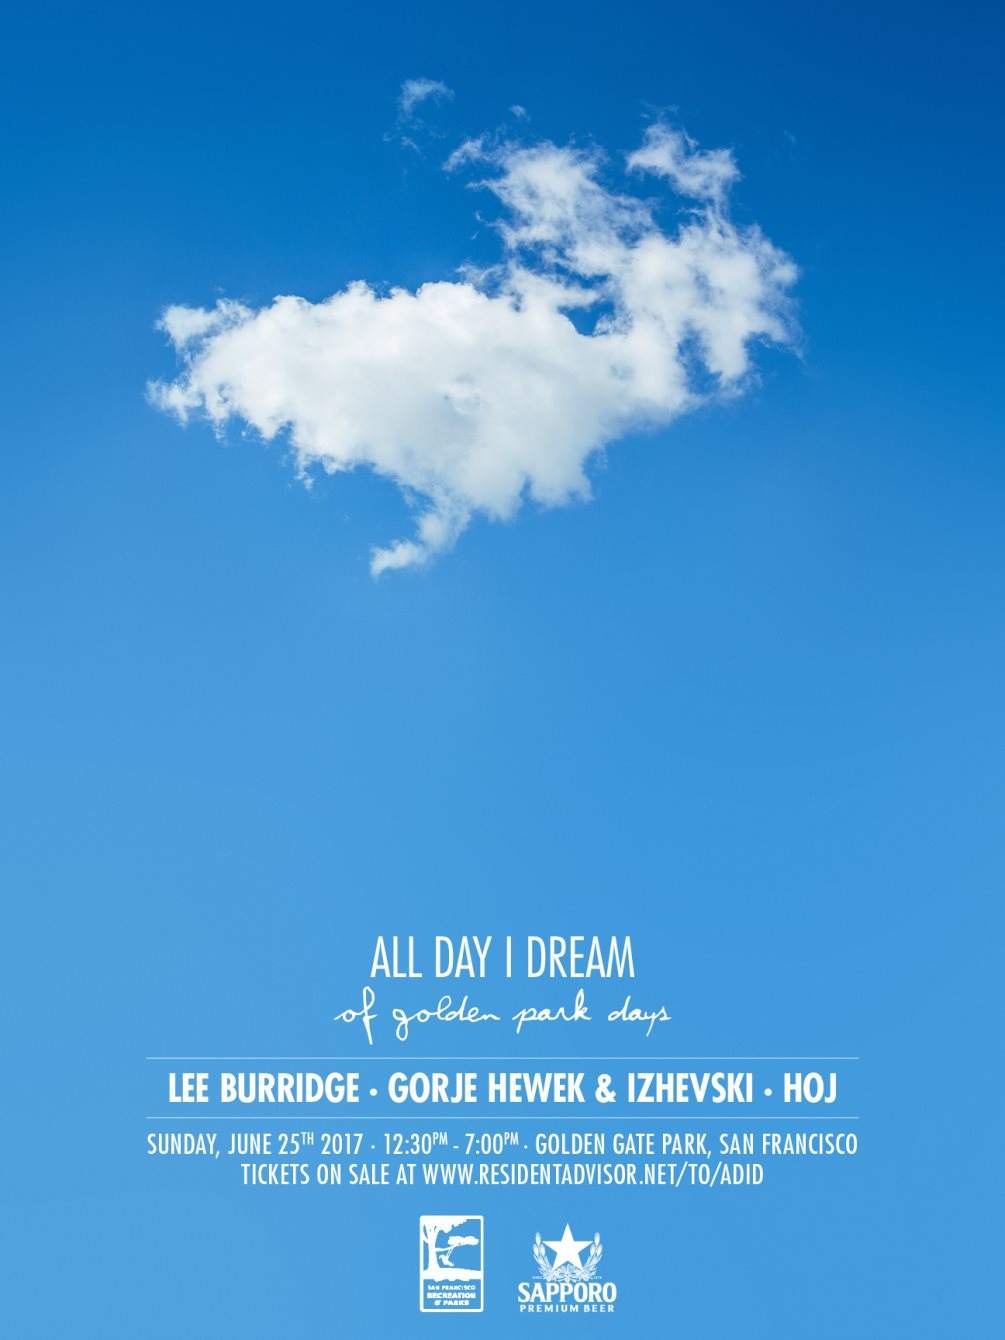 All Day I Dream of Golden Park Days - フライヤー表